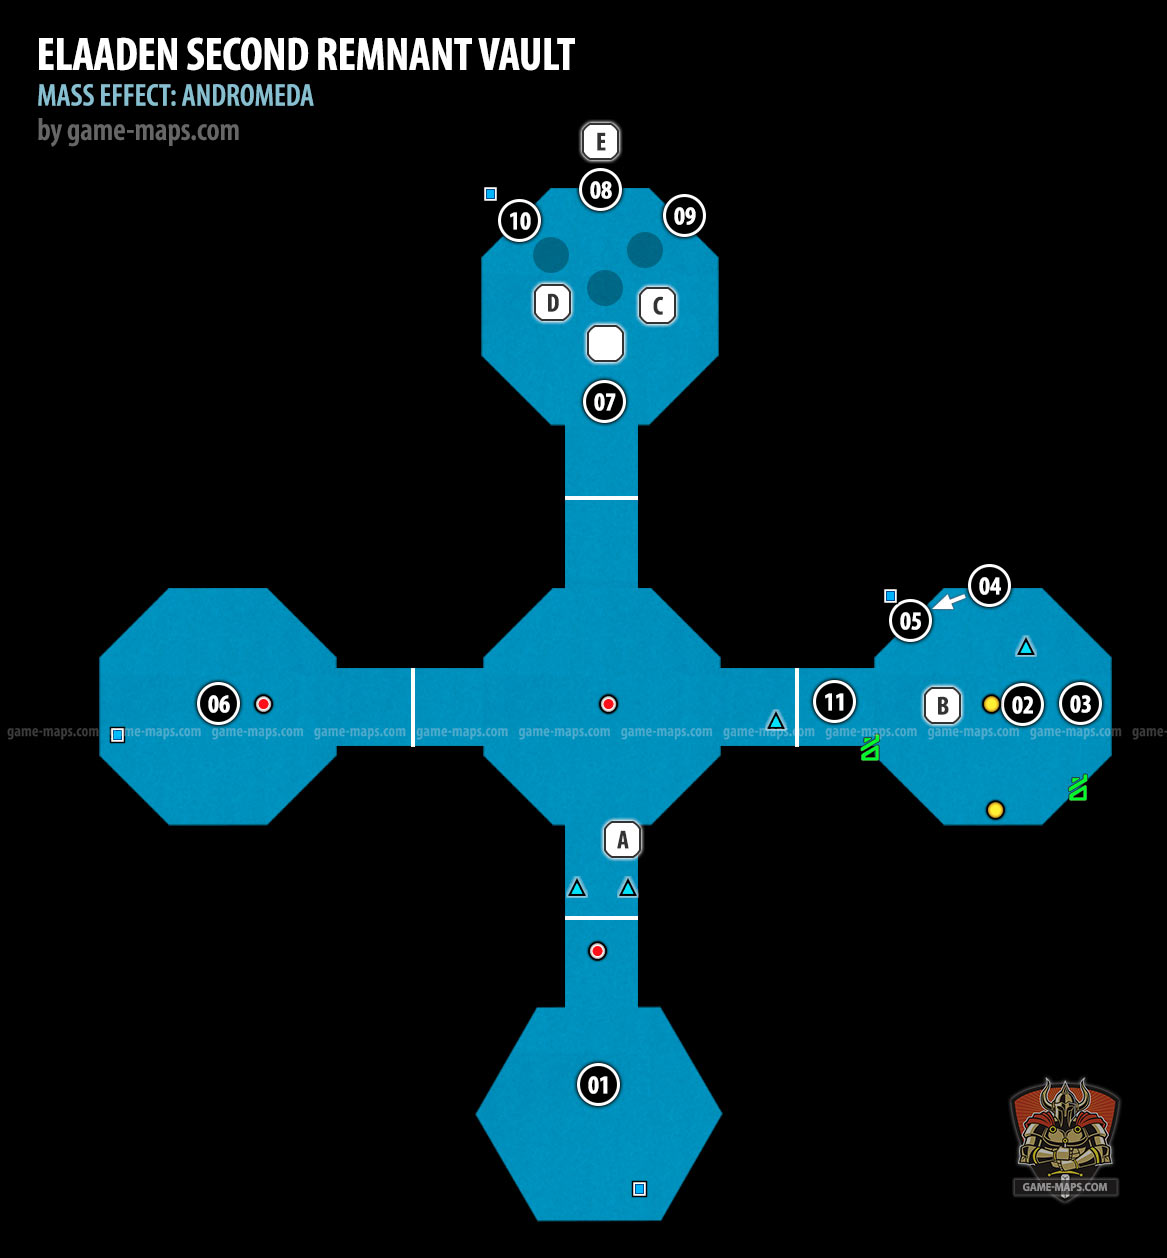 Elaaden Second Remnant Vault map for Mass Effect Andromeda